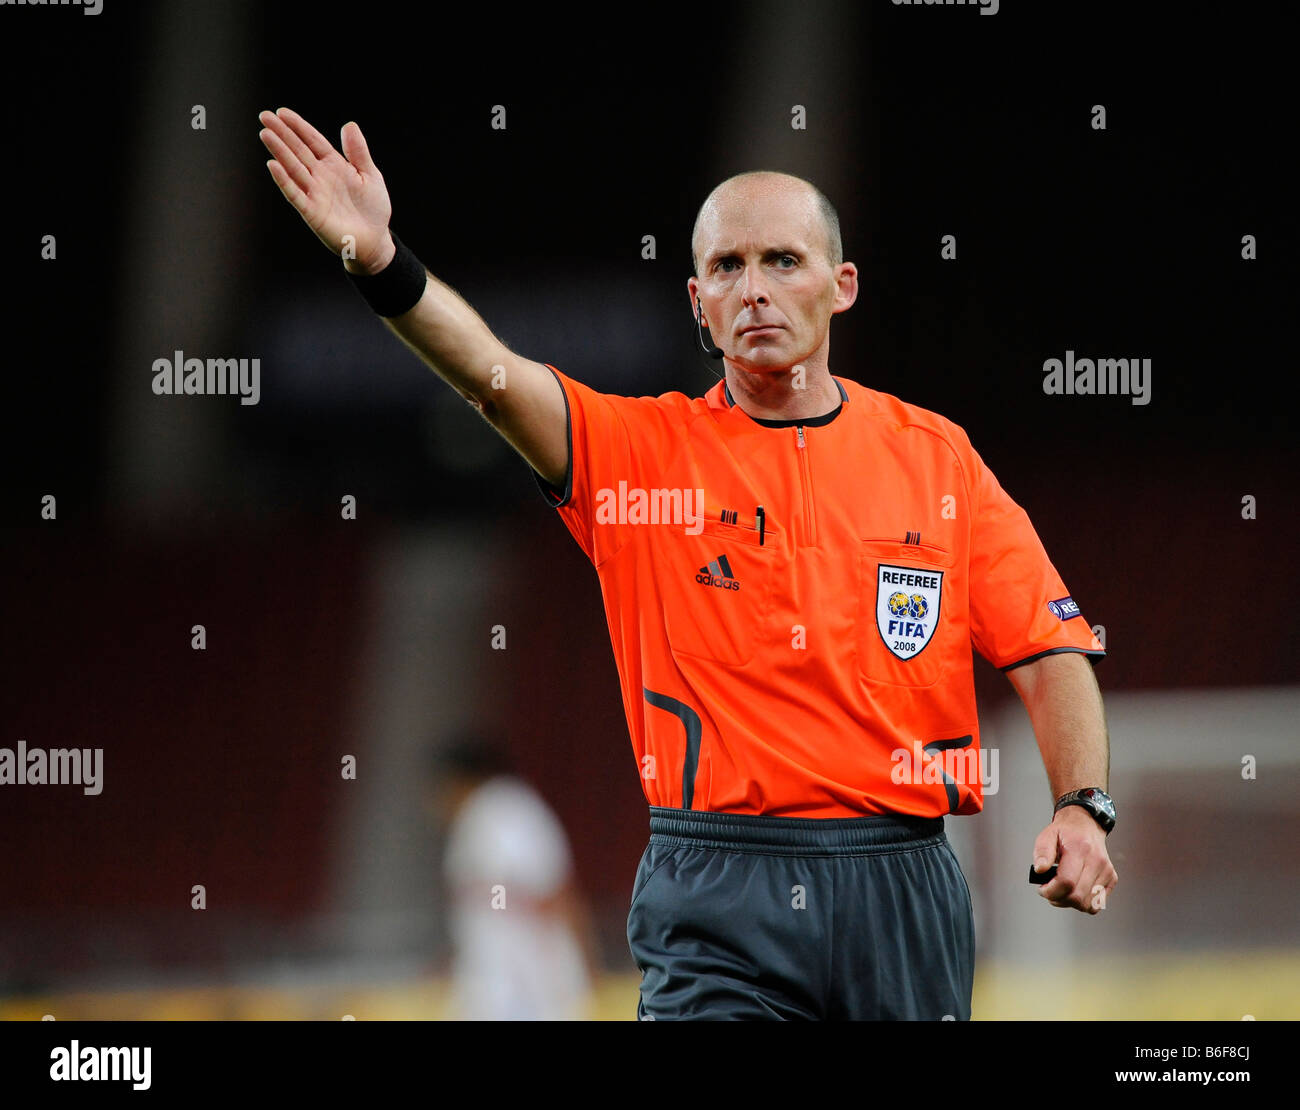 FIFA referee Michael Leslie DEAN, England, gesticulating Stock Photo